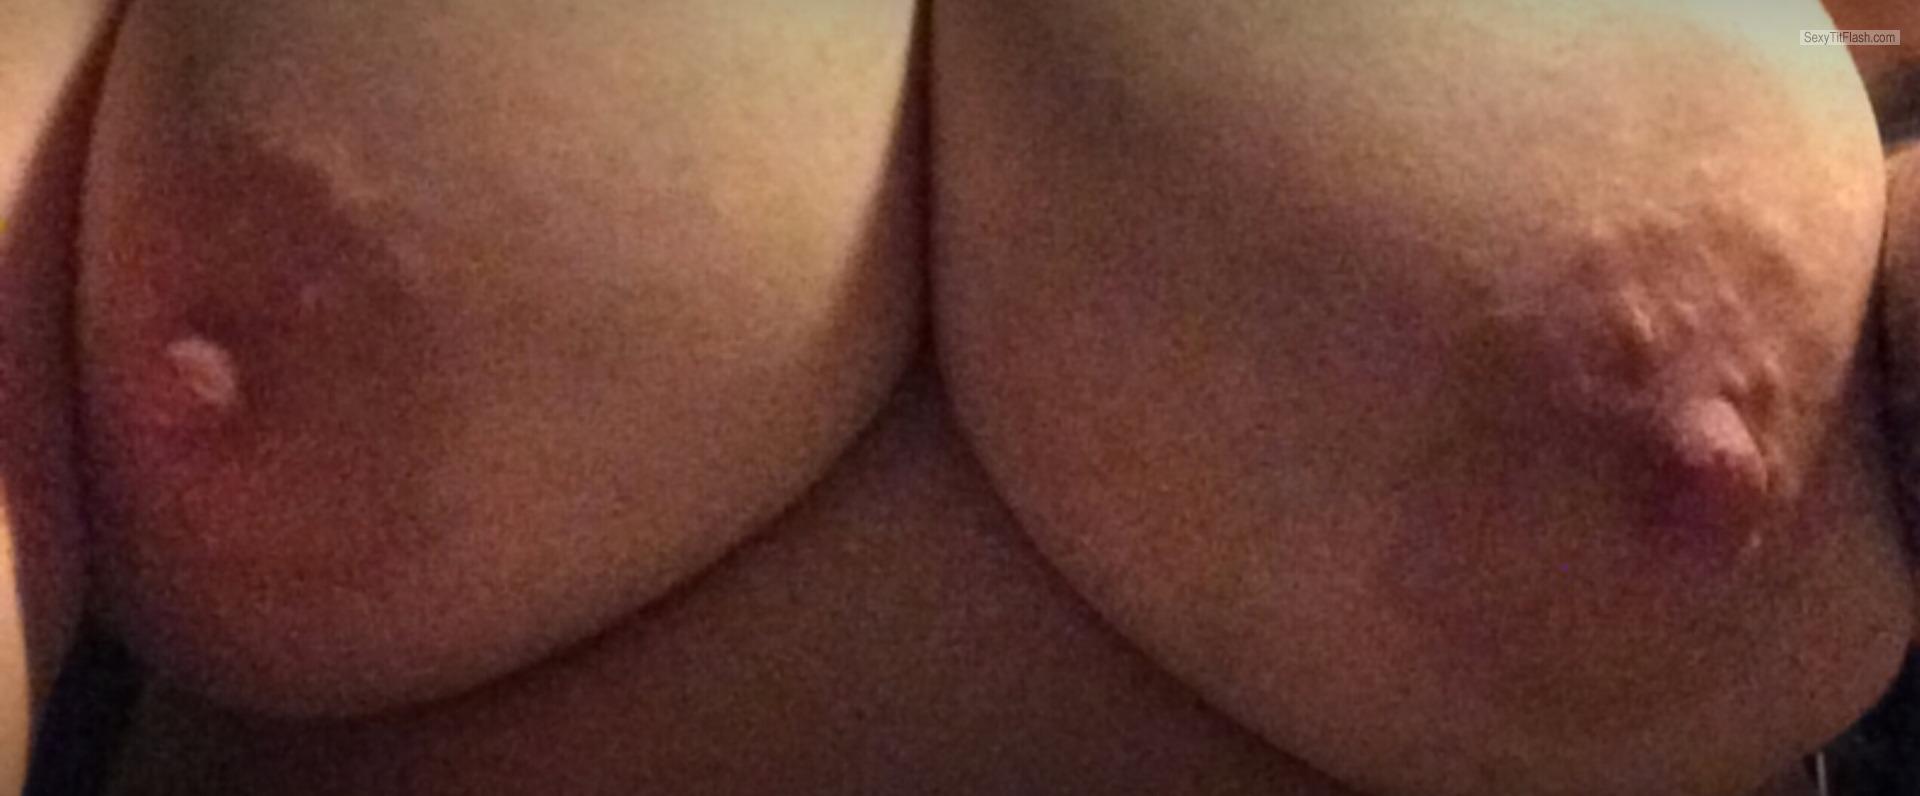 My Extremely big Tits Selfie by Bigg Juggs